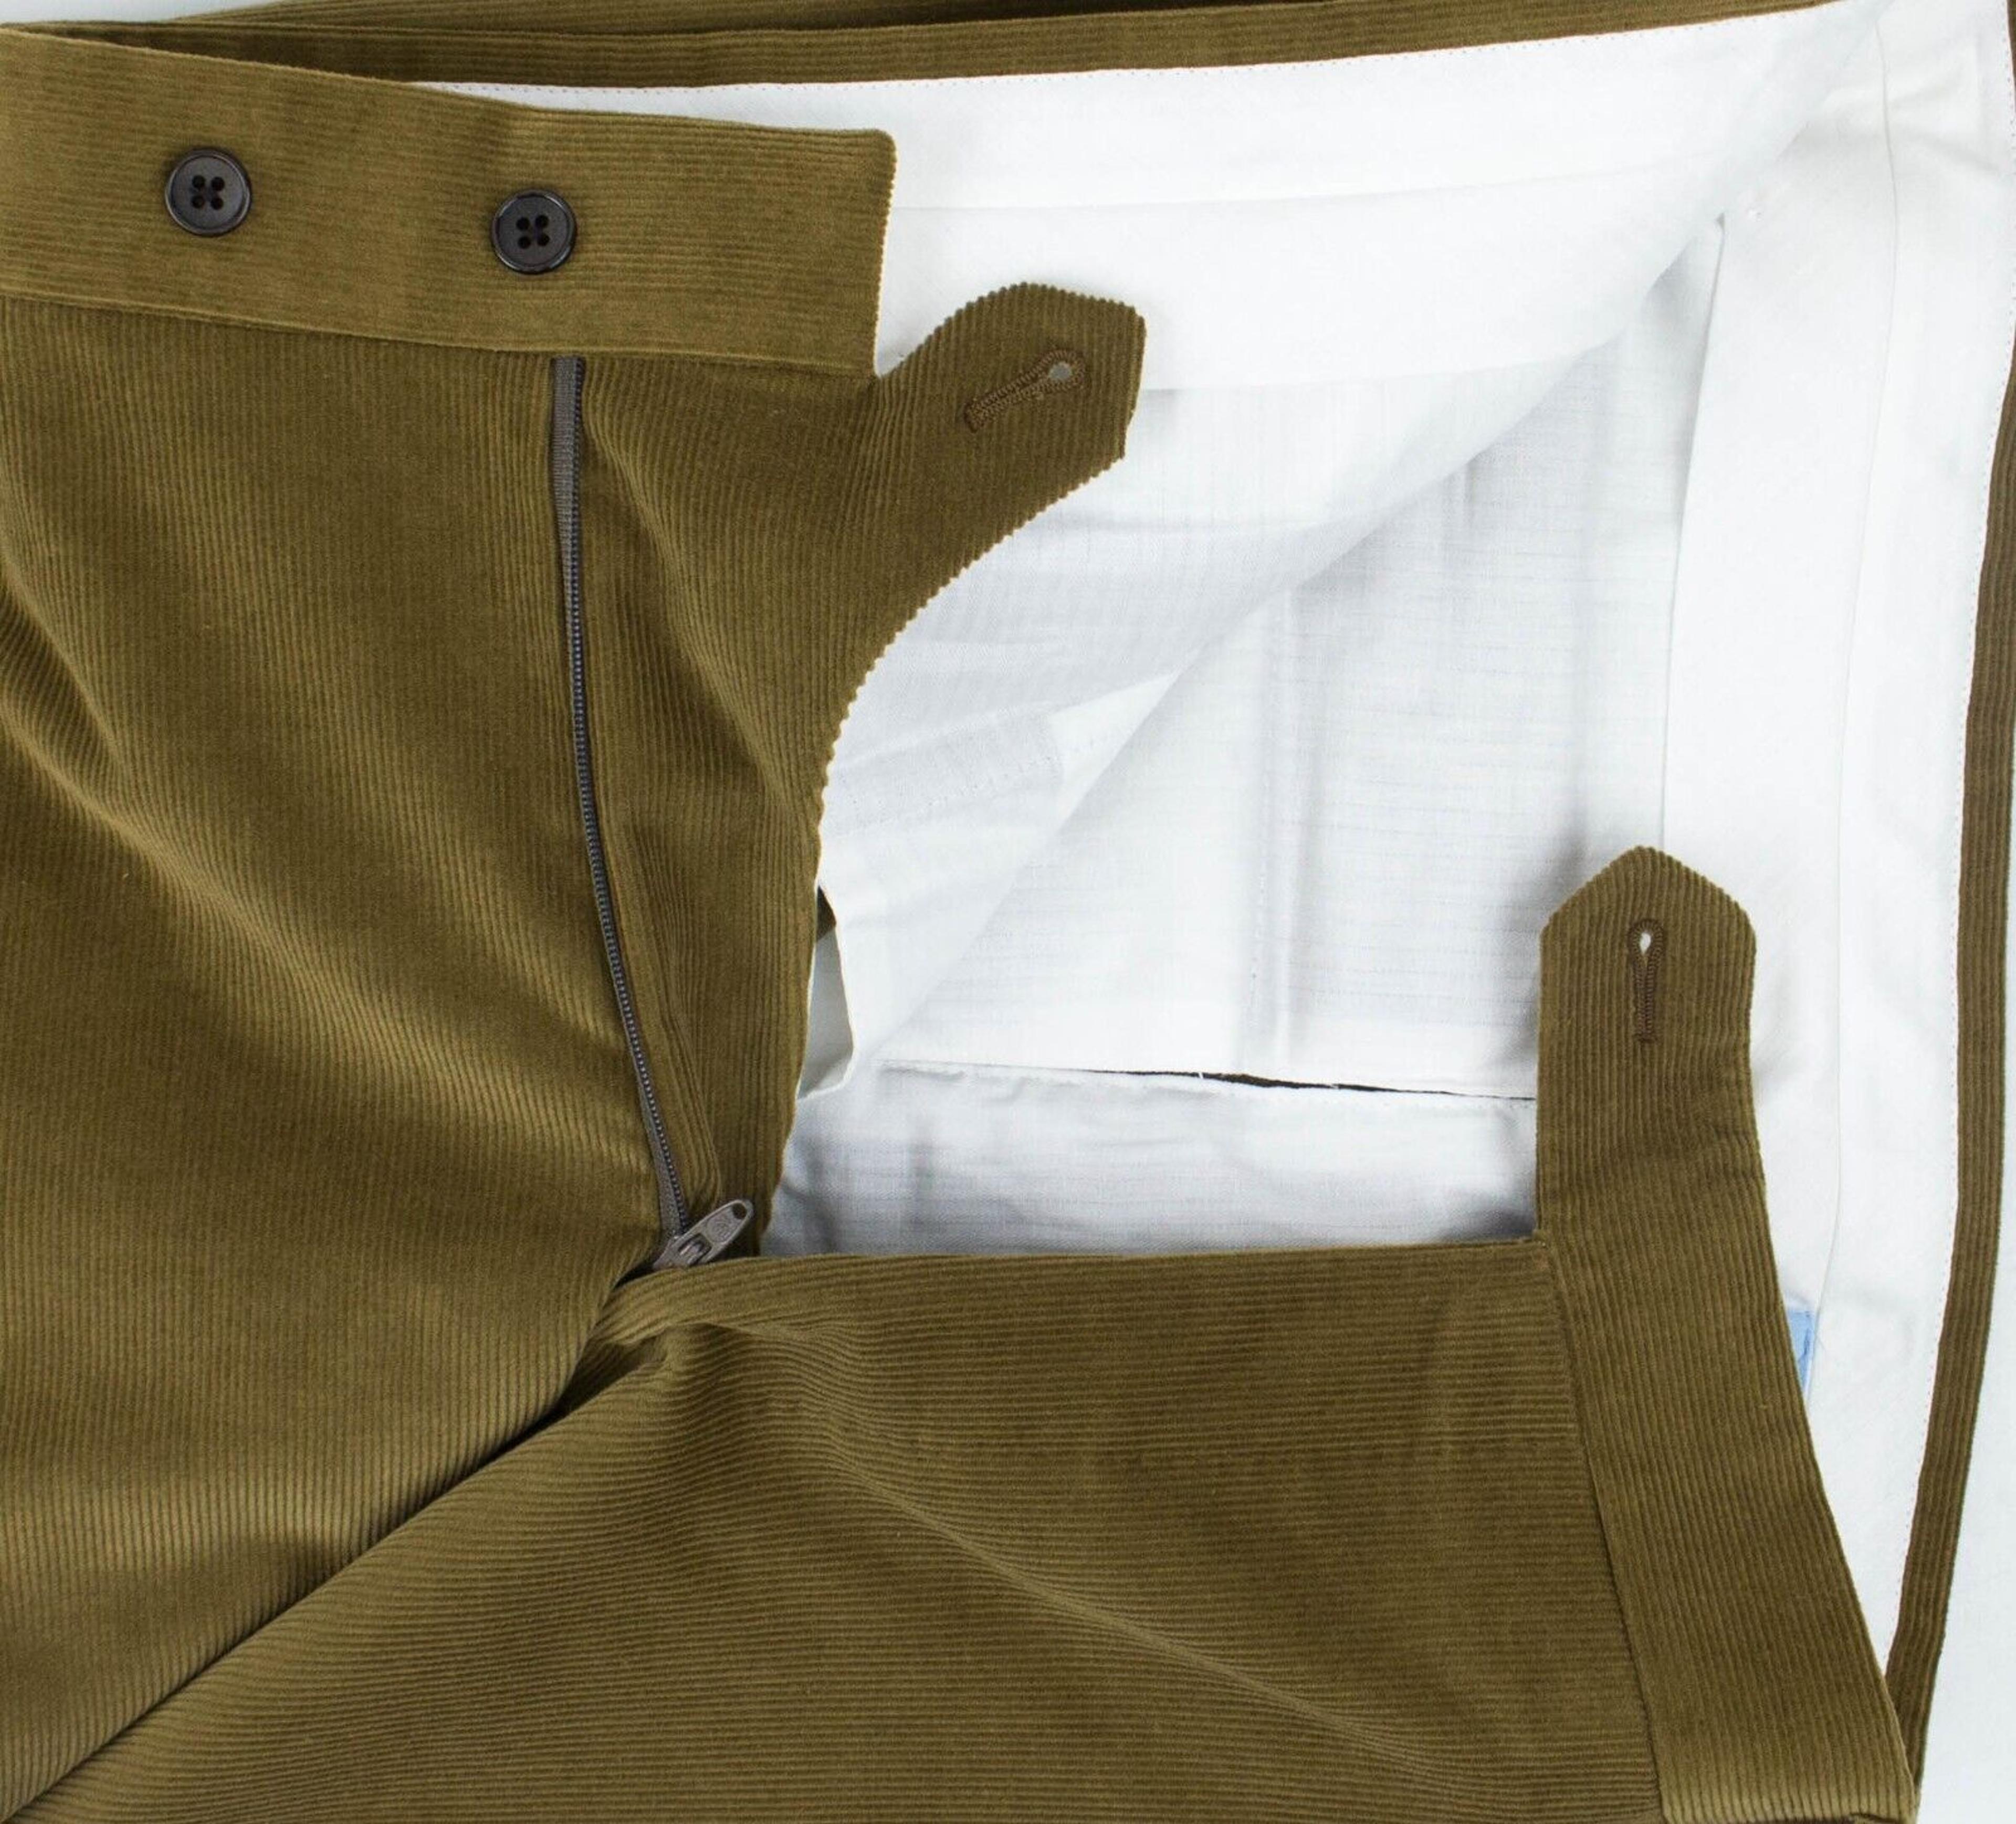 Alternate View 6 of Brown Cotton Blend Corduroy Casual Pants